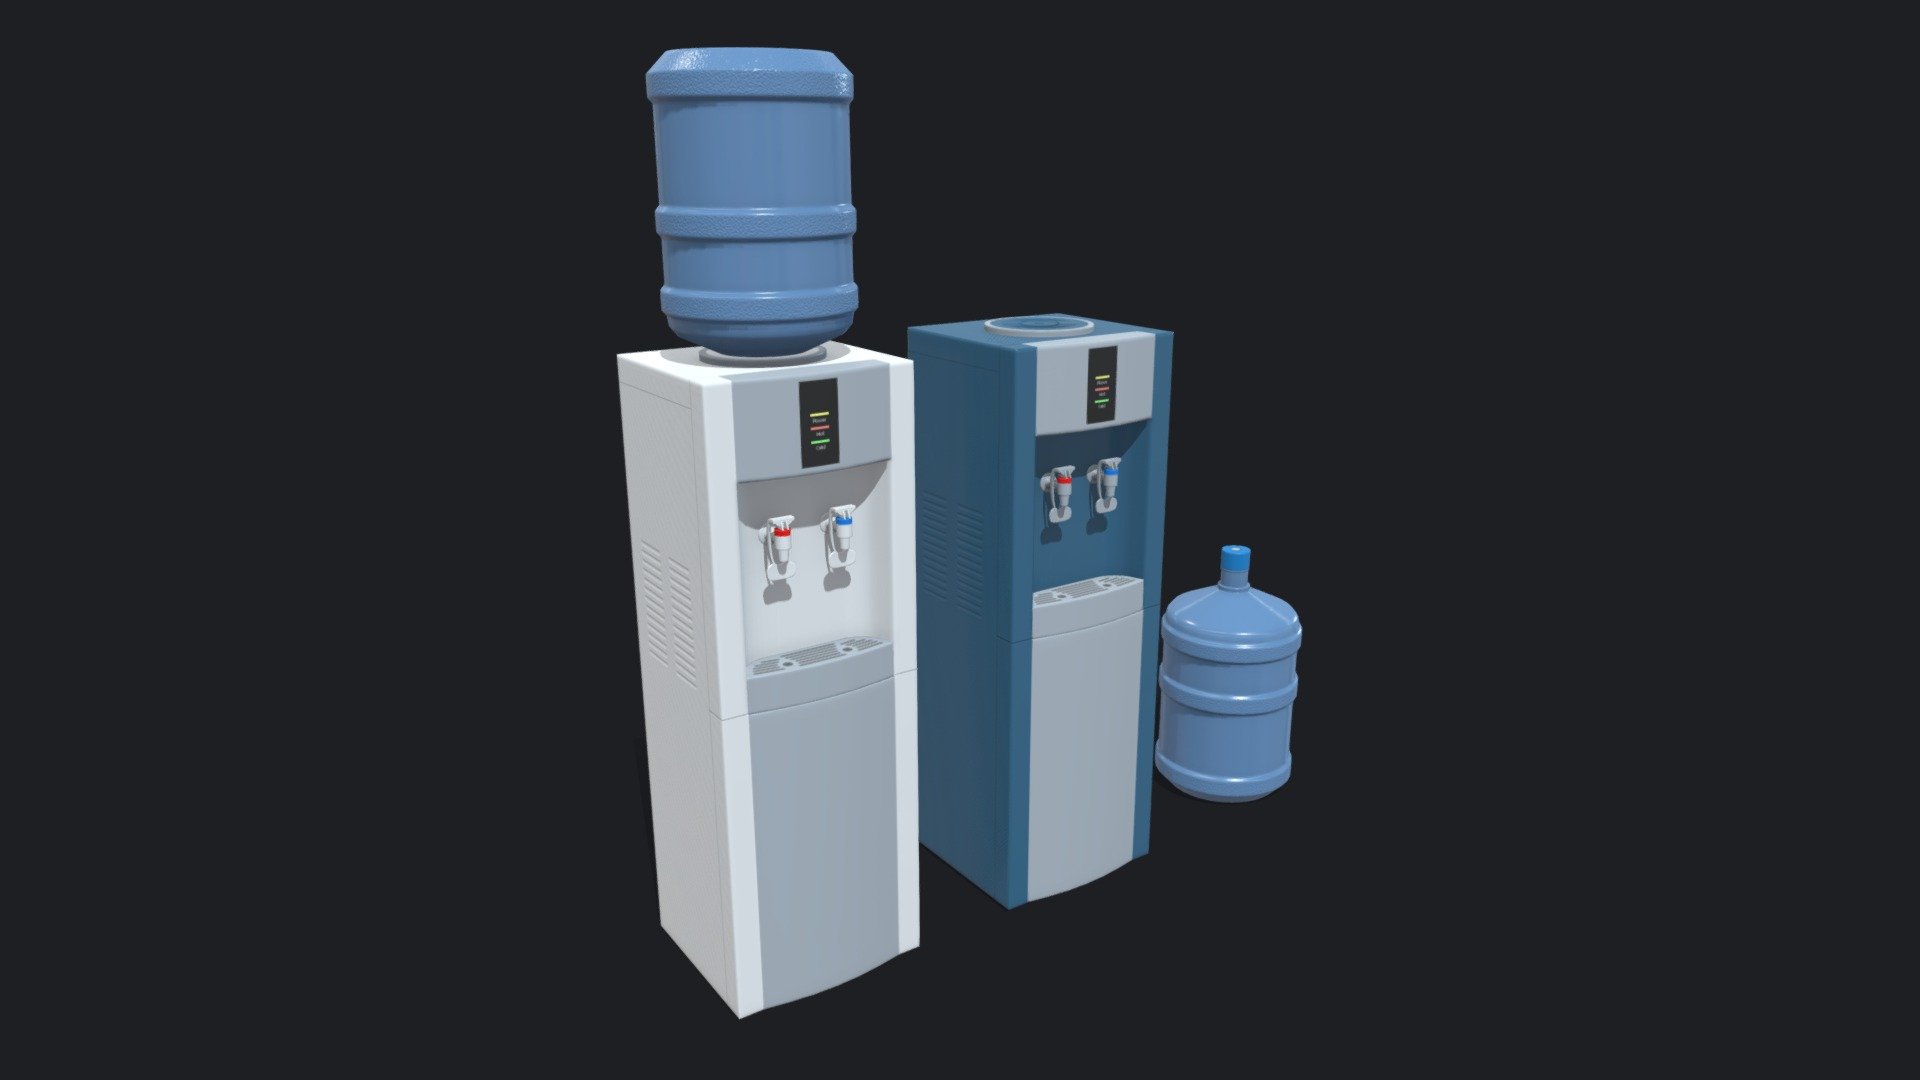 Game ready low-poly Water Cooler model in 2 colors with PBR textures for game engines/renderers. 4096x4096 PBR Metallic/Roughness textures.

This product is intended for game/real time/background use. This model is not intended for subdivision. Geometry is triangulated. Model unwrapped manually. All materials and objects named appropriately. Scaled to approximate real world size. Tested in Marmoset Toolbag 3. Tested in Unreal Engine 4. Tested in Unity. No special plugins needed. .obj and .fbx versions exported from Blender 2.83.

Triangles: 2954
Vertices: 1610

4096x4096 textures in png format:
- General PBR Metallic/Roughness  textures: BaseColor, Metallic, Roughness, Normal, AO, Emission;
- Unity Textures: Albedo, MetallicSmoothness, Normal, AO, Emission;
- Unreal Engine 4 textures: BaseColor, OcclusionRoughnessMetallic, Normal, Emission;
- PBR Specular/Glossiness textures: Diffuse, Specular, Glossiness, Normal, AO, Emission 3d model